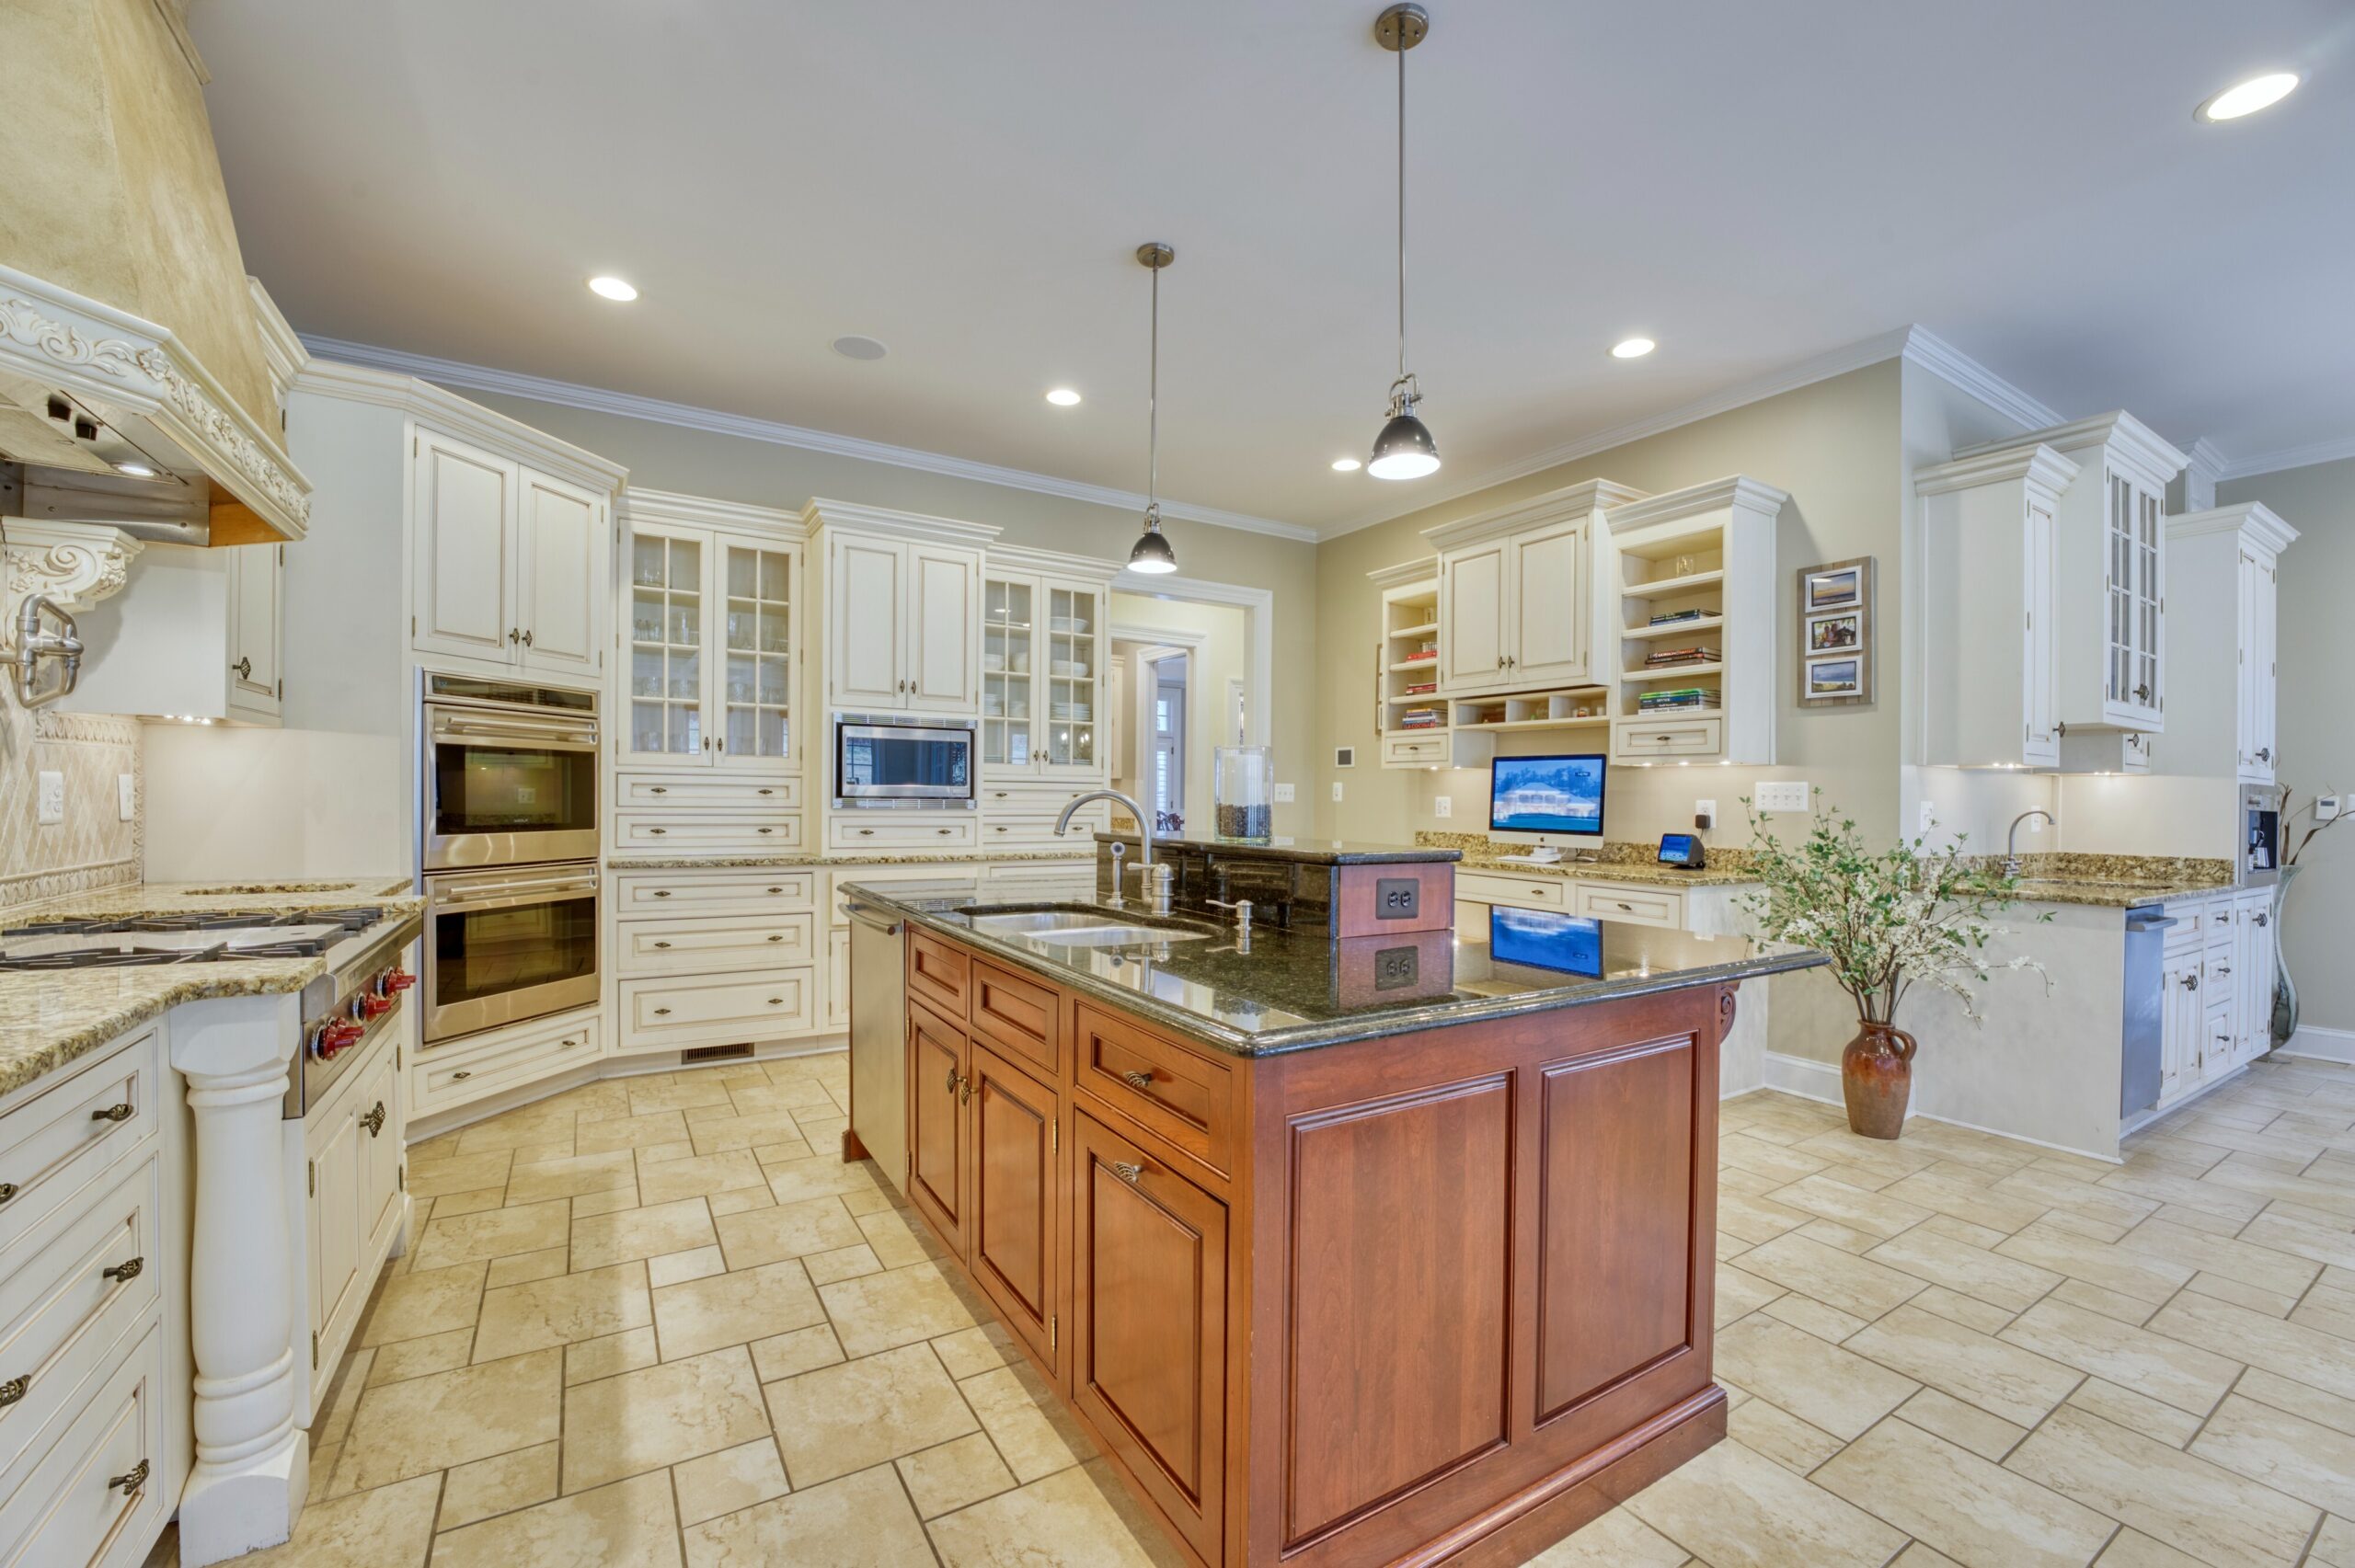 Interior professional photo of 40573 Spectacular Bid Place - showing the main gourmet kitchen